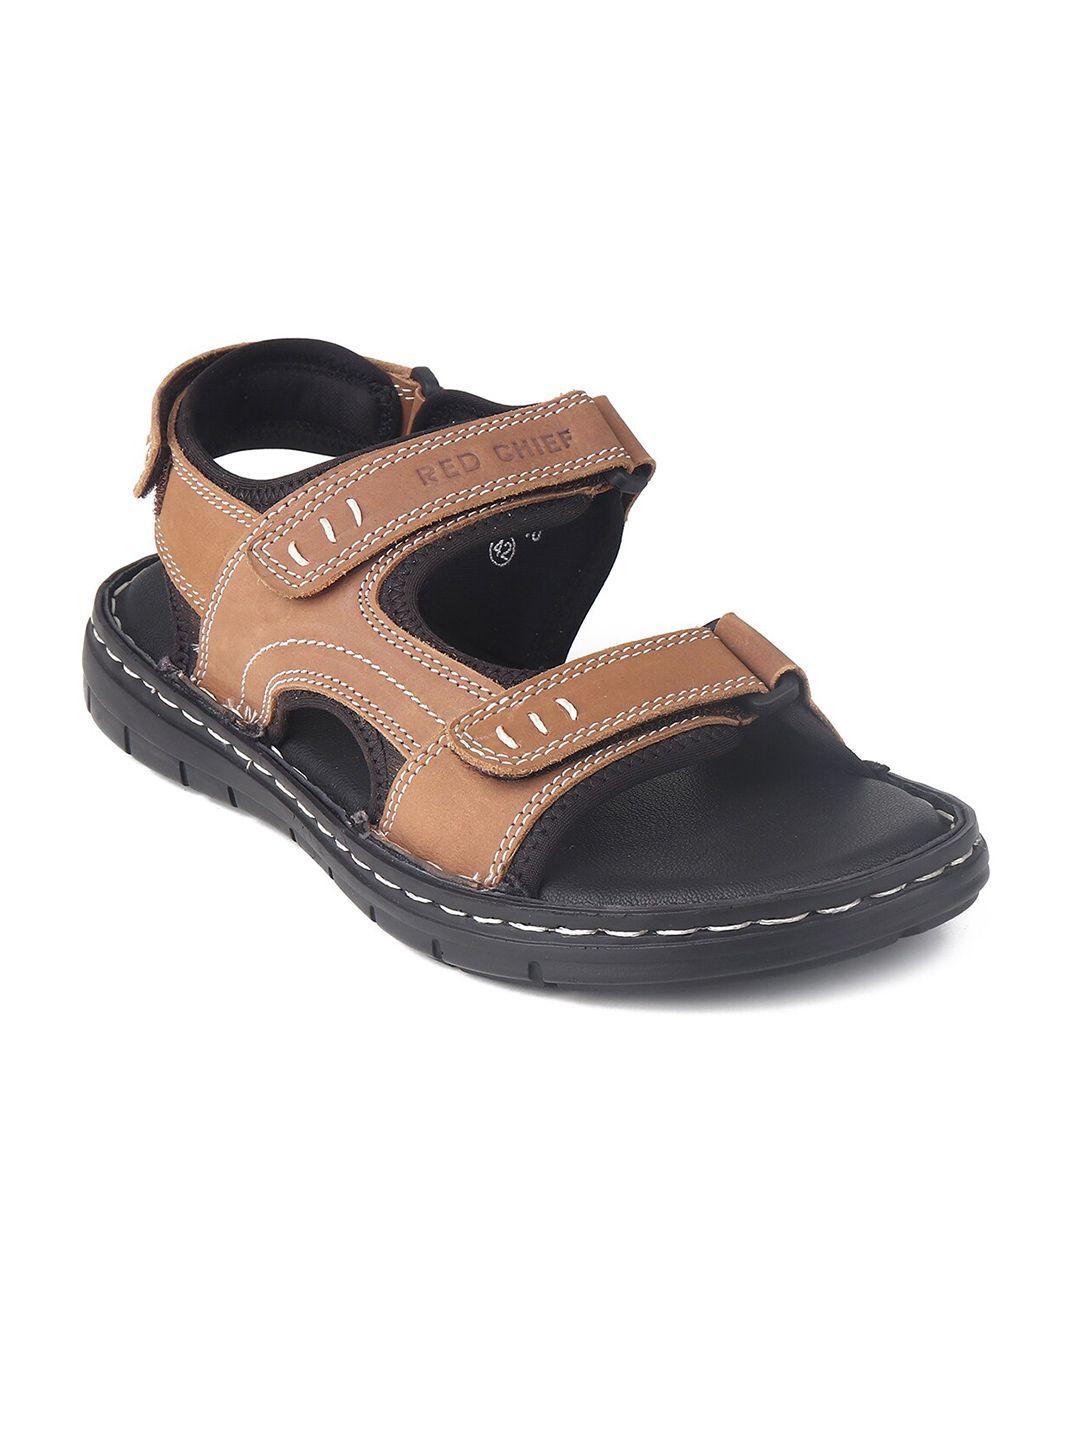 red-chief-men-textured-leather-comfort-sandals